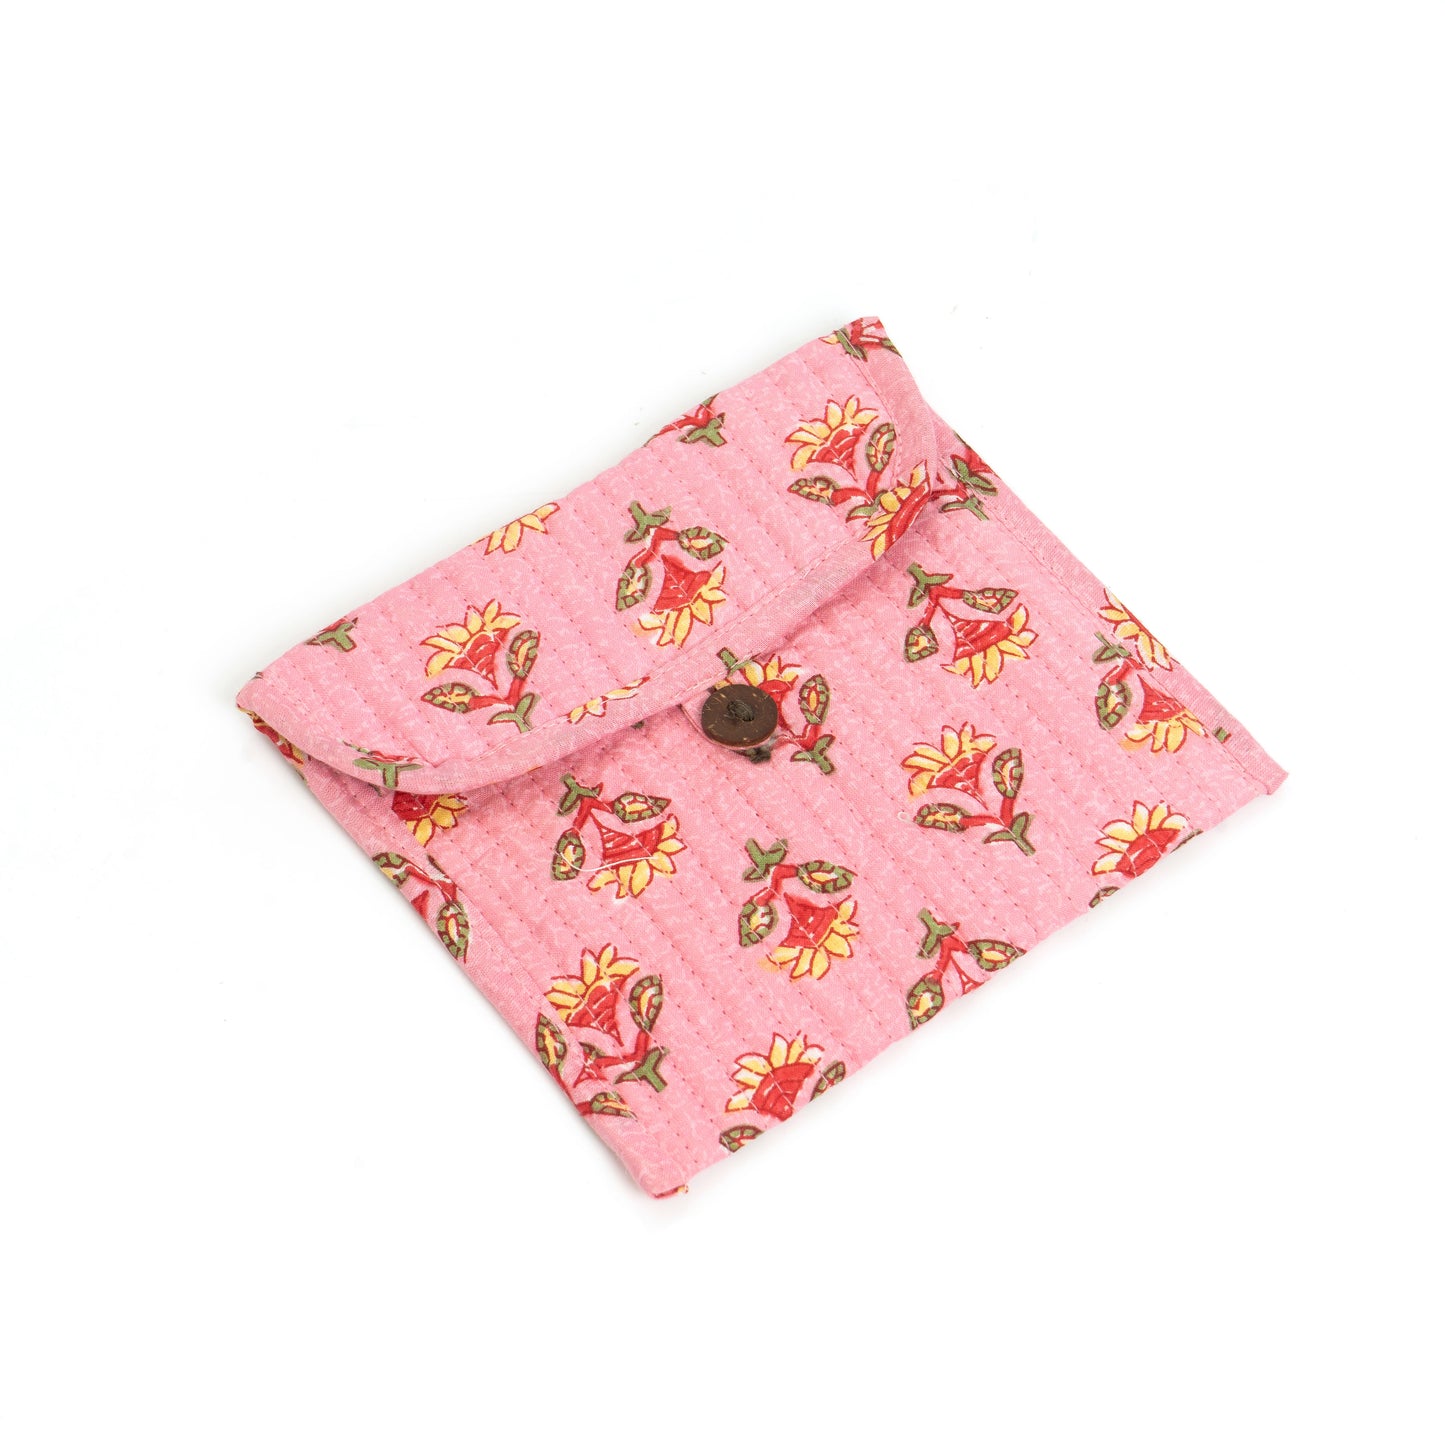 Floral Fiesta Sanitary Pad Pouch